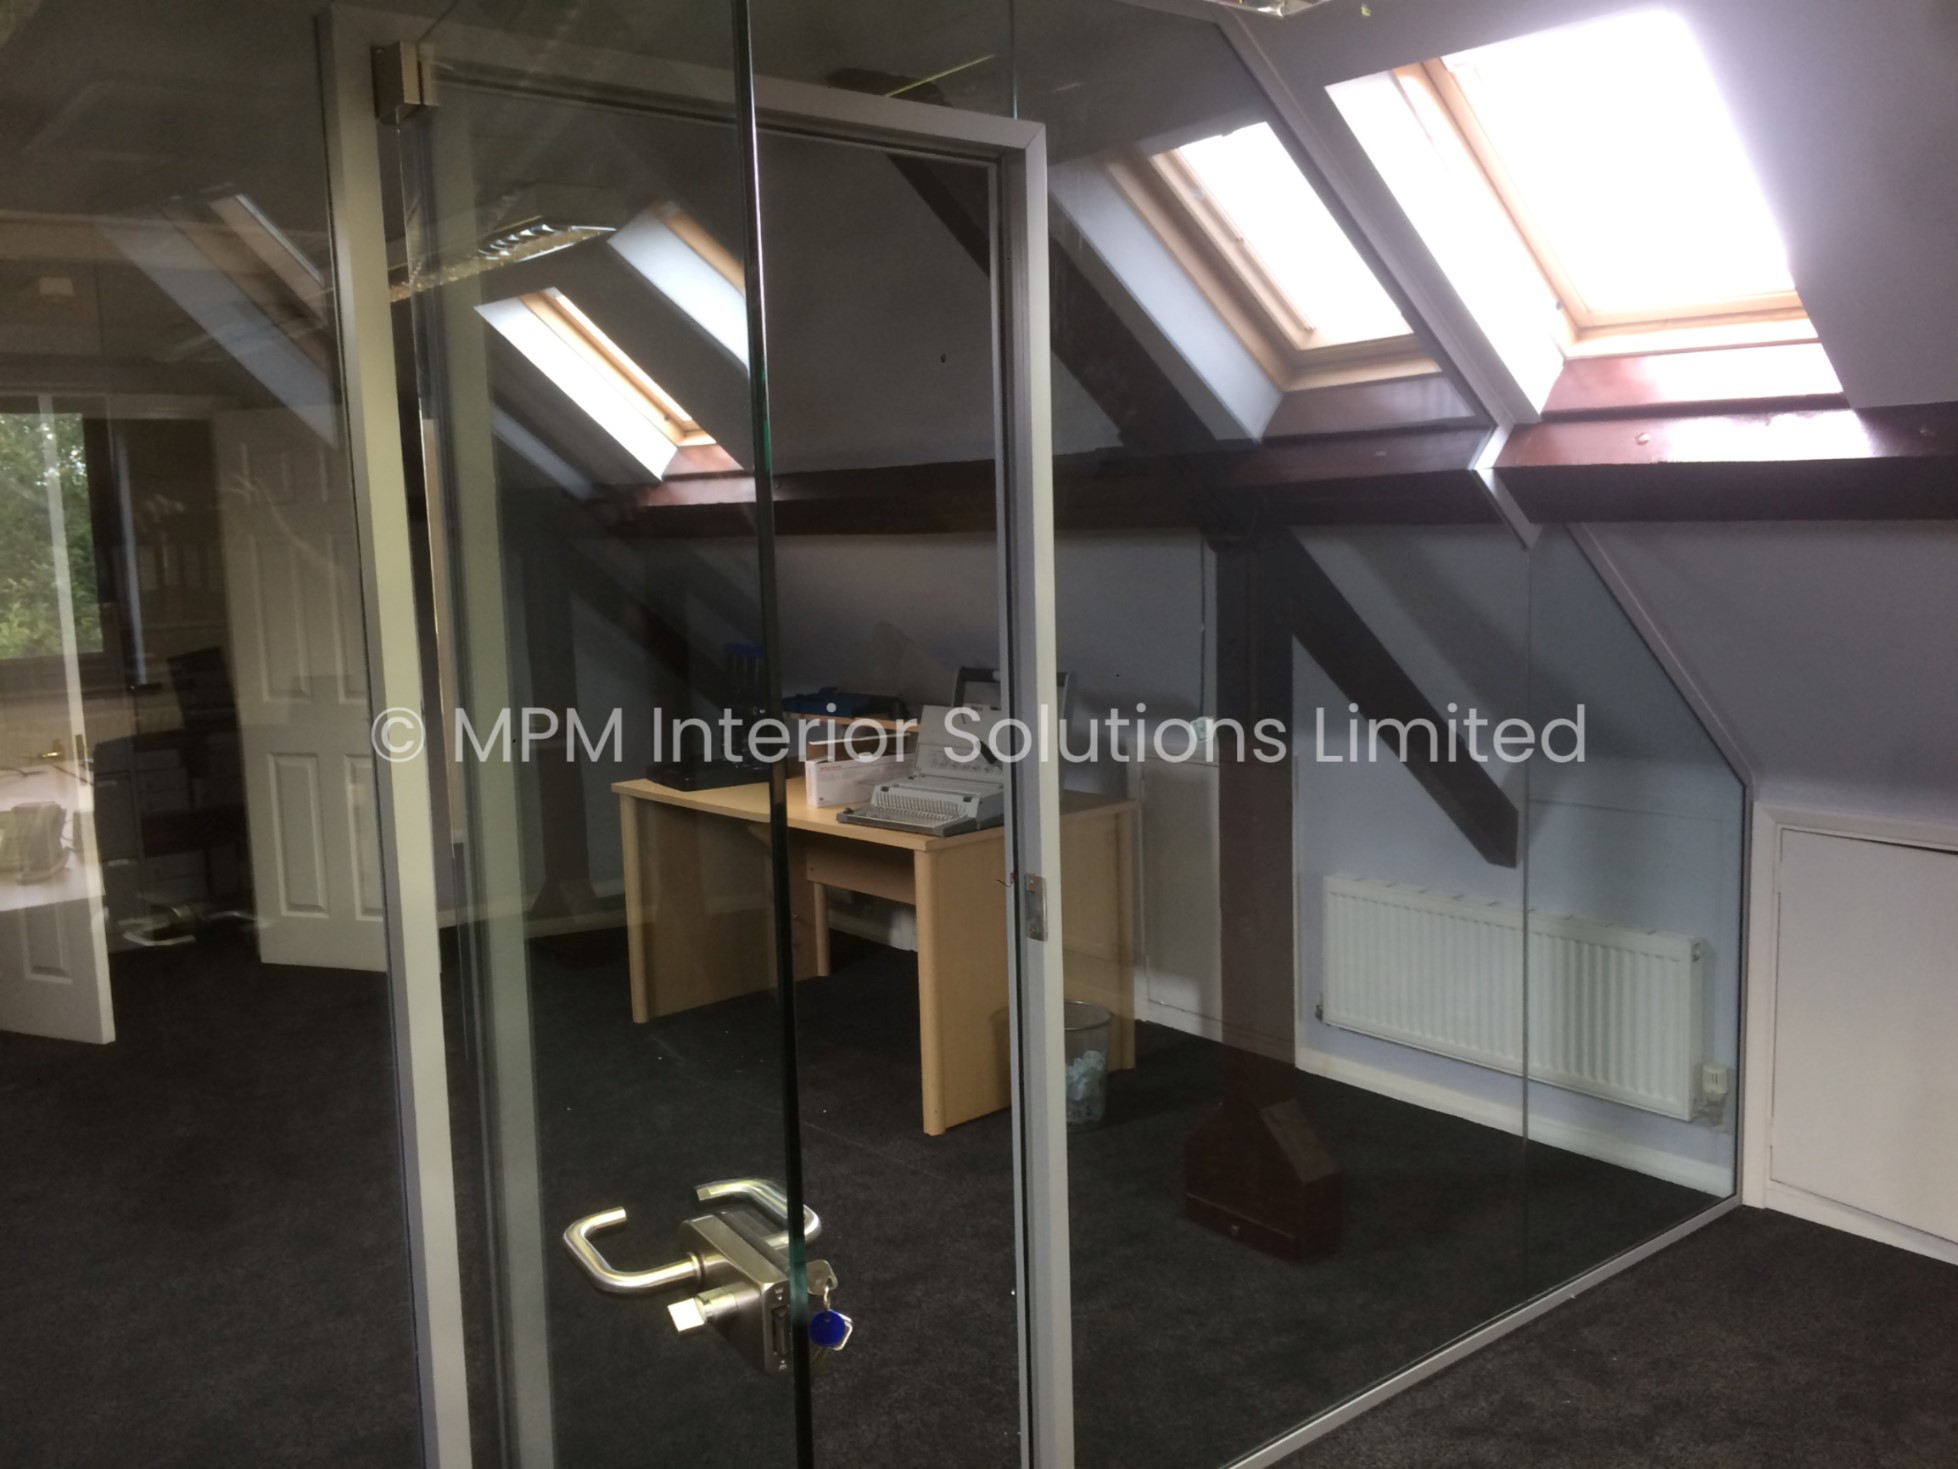 Frameless Glass Office Partitioning, Edwards & Ward Ltd (Crowborough, East Sussex), MPM Interior Solutions Limited